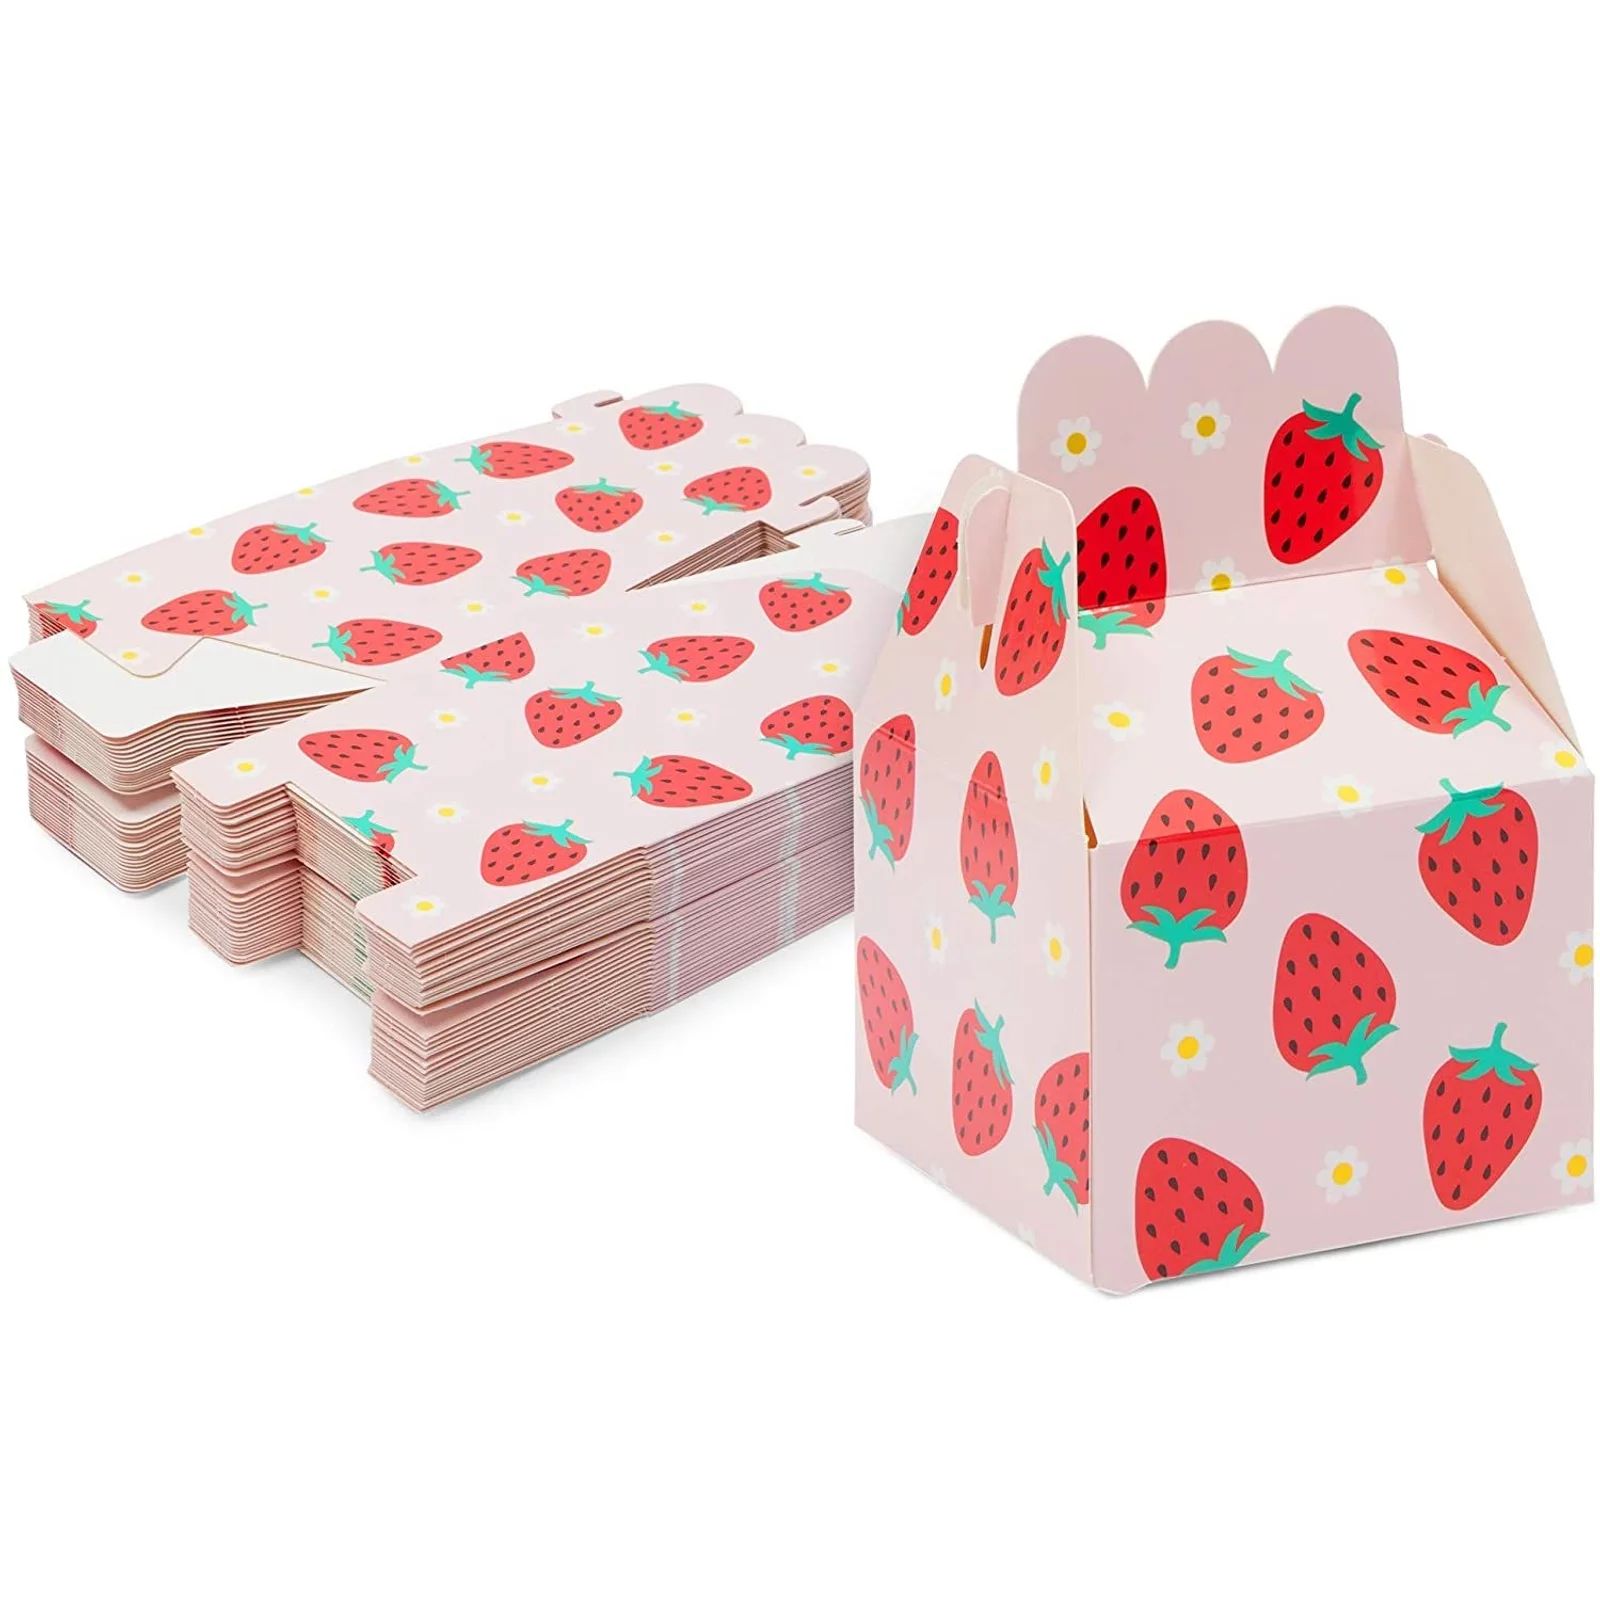 Sparkle Bash Strawberry Treat Birthday Multi-color Paper Gift Boxes, (36 Count) 3.5" | Walmart (US)